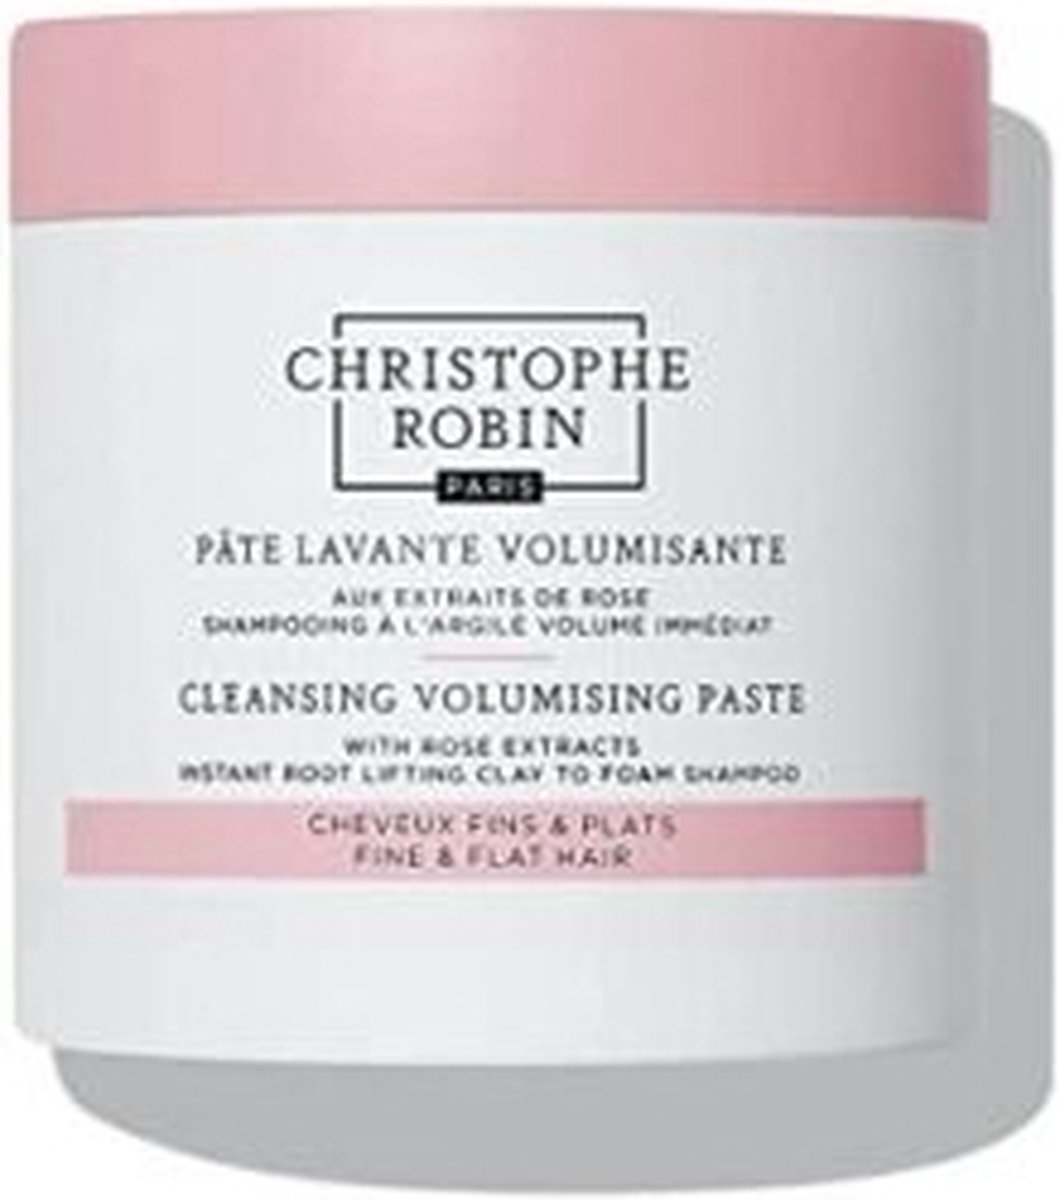 Christophe Robin Cleansing Volumising Paste Pure with Rose Extracts 250ml - Anti-roos vrouwen - Voor Alle haartypes